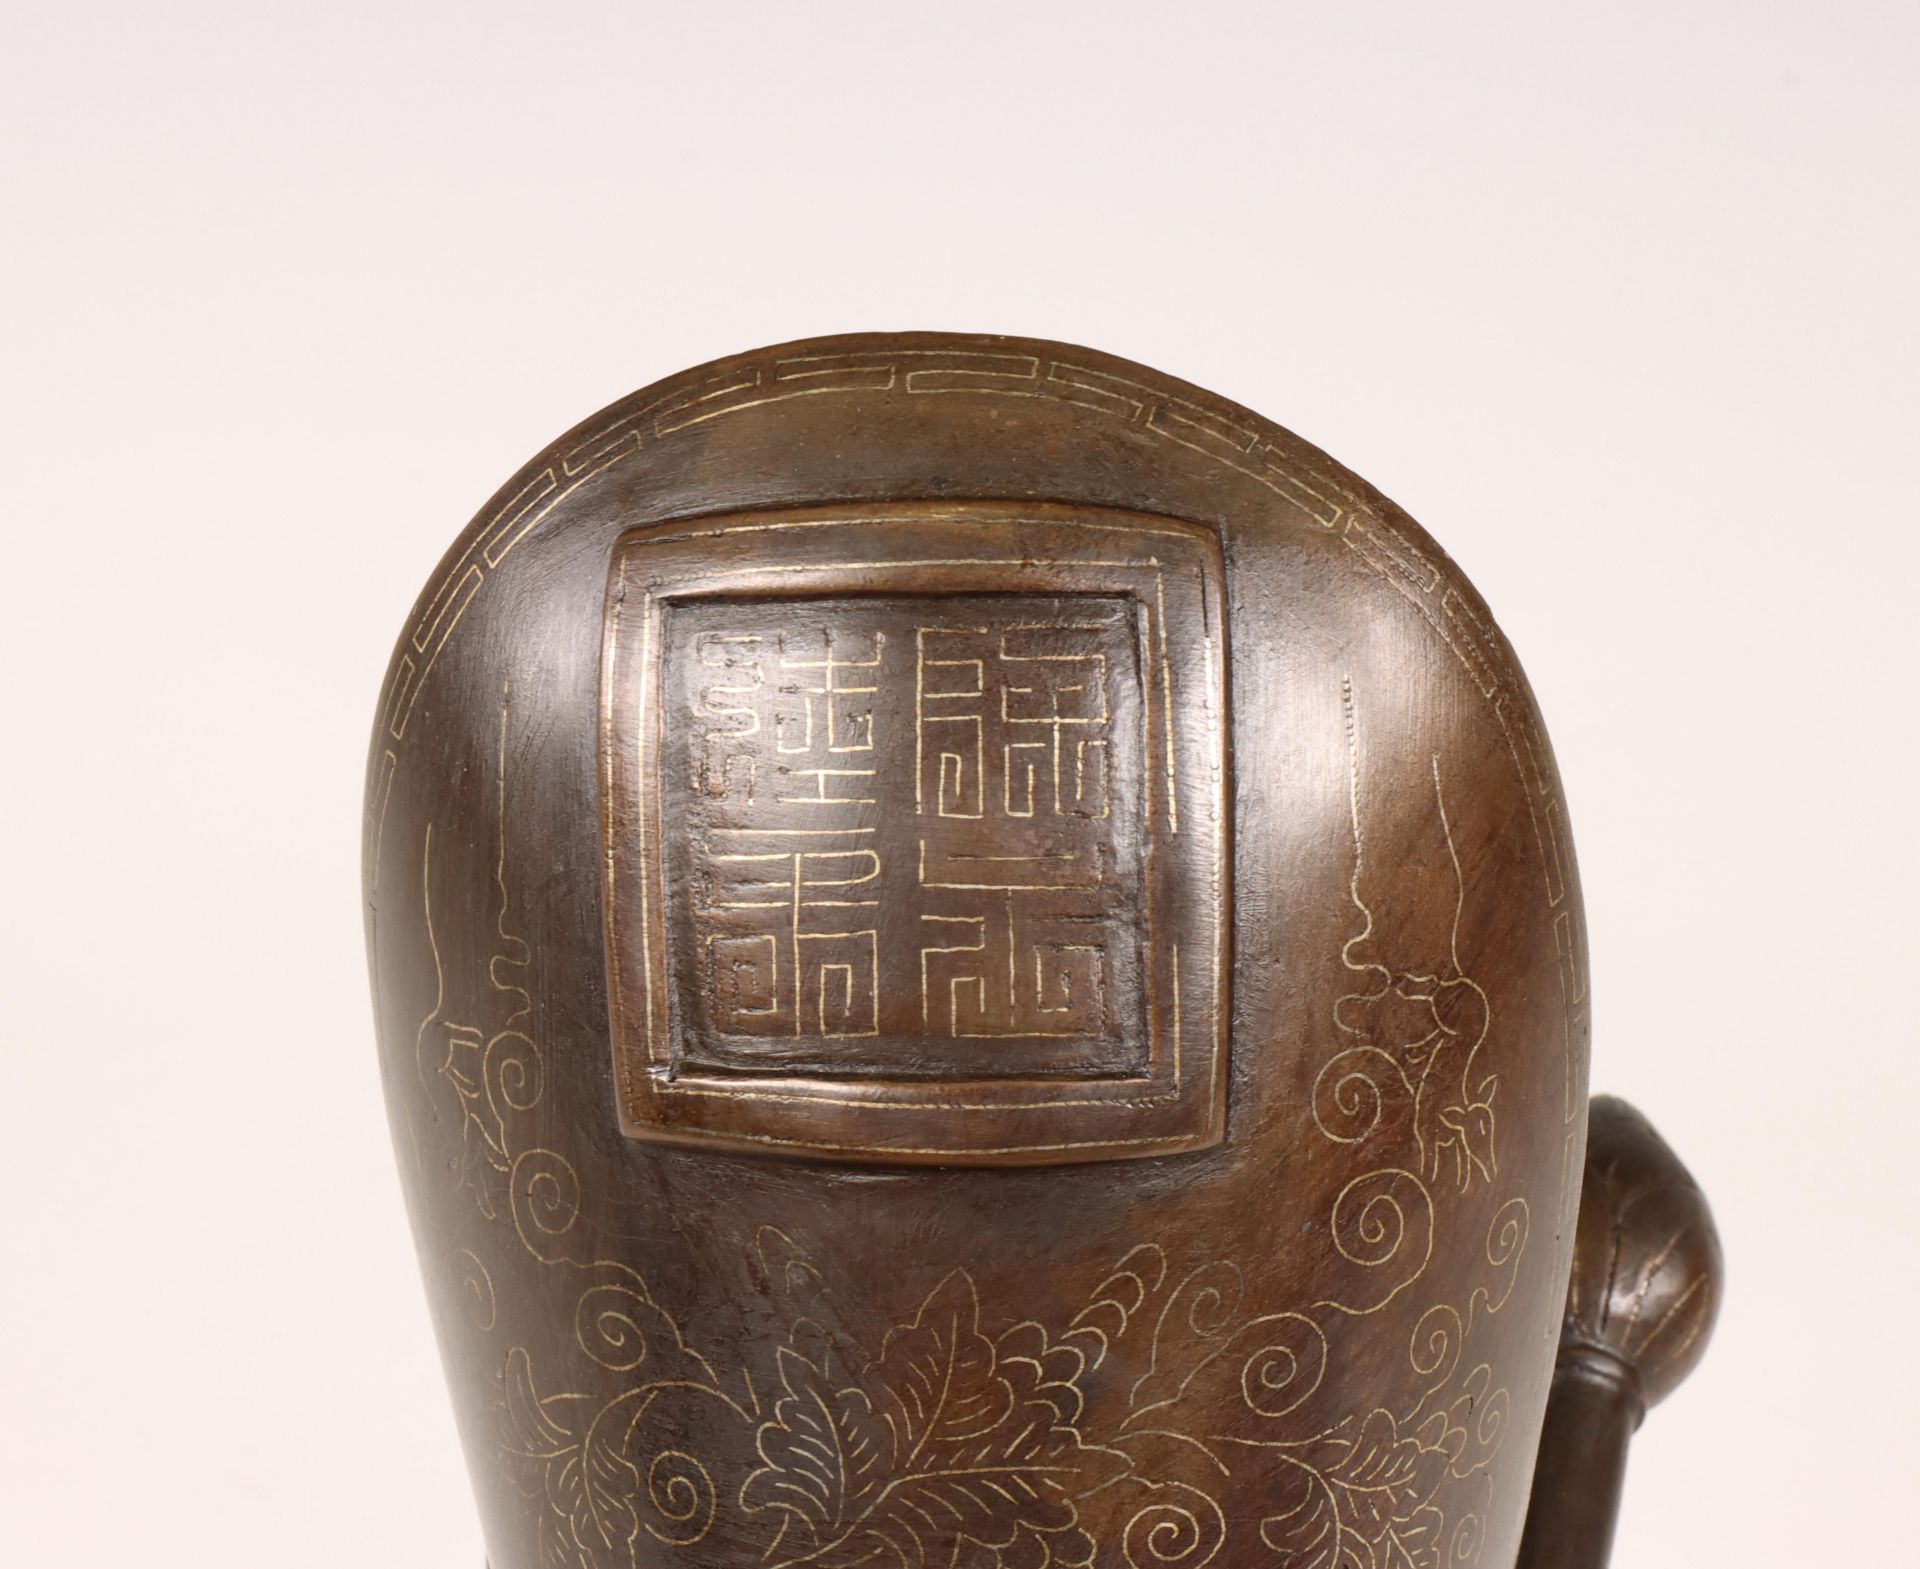 China, a silver-inlaid bronze tripod ritual wine vessel vase, Qing dynasty, 18th century, - Image 6 of 7